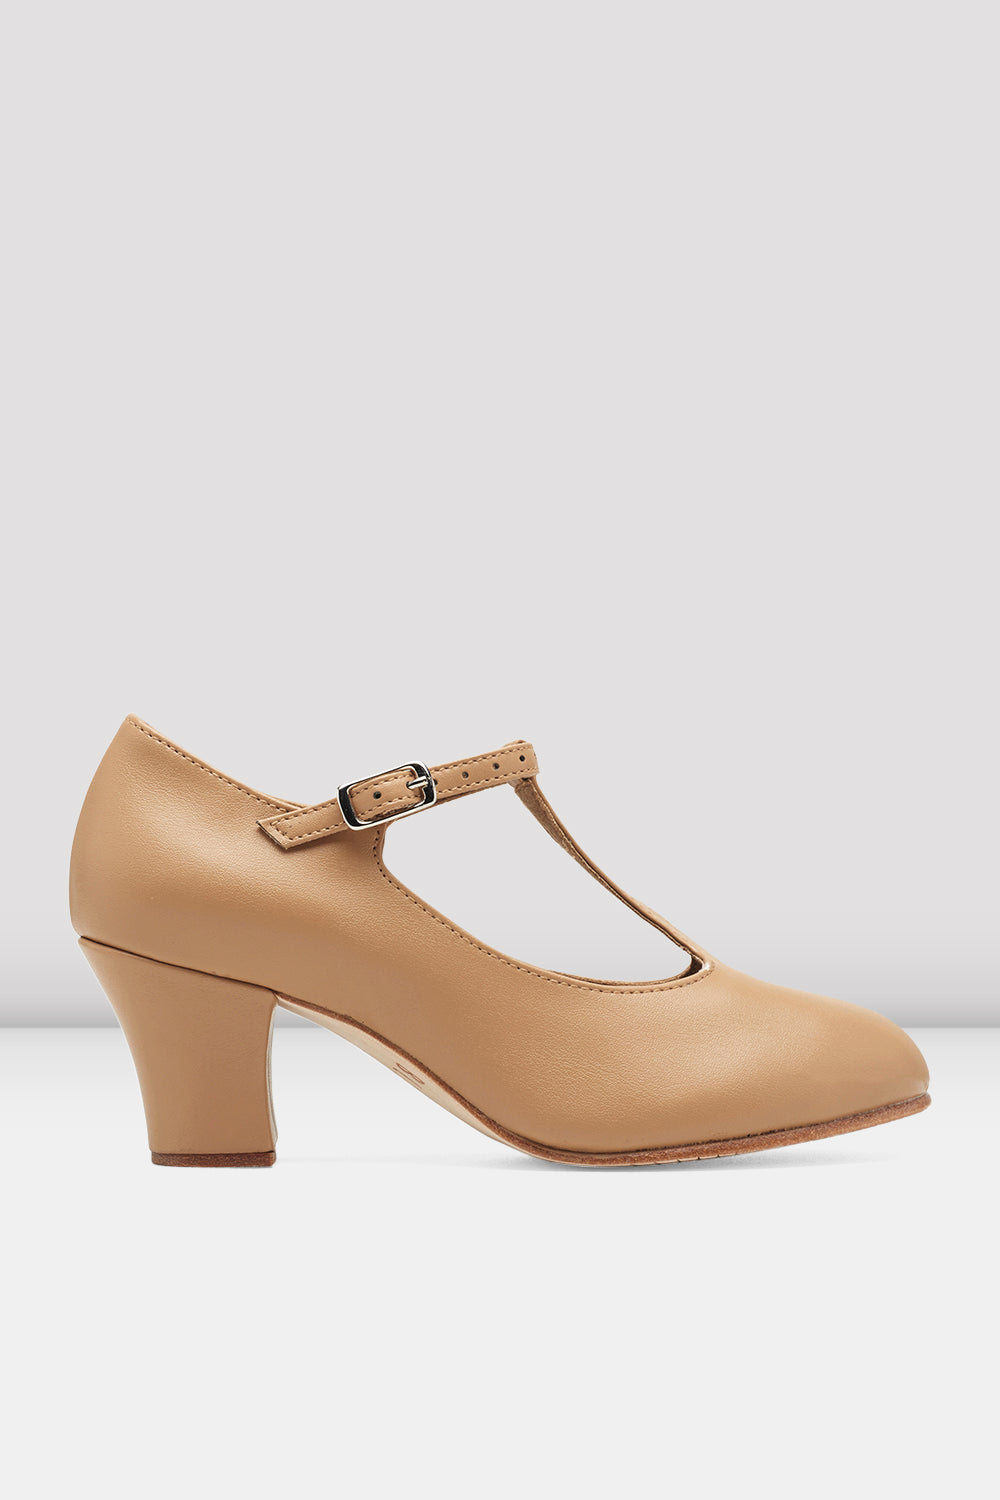 BLOCH Ladies Roxie Character Shoes, Tan Synthetic Leather